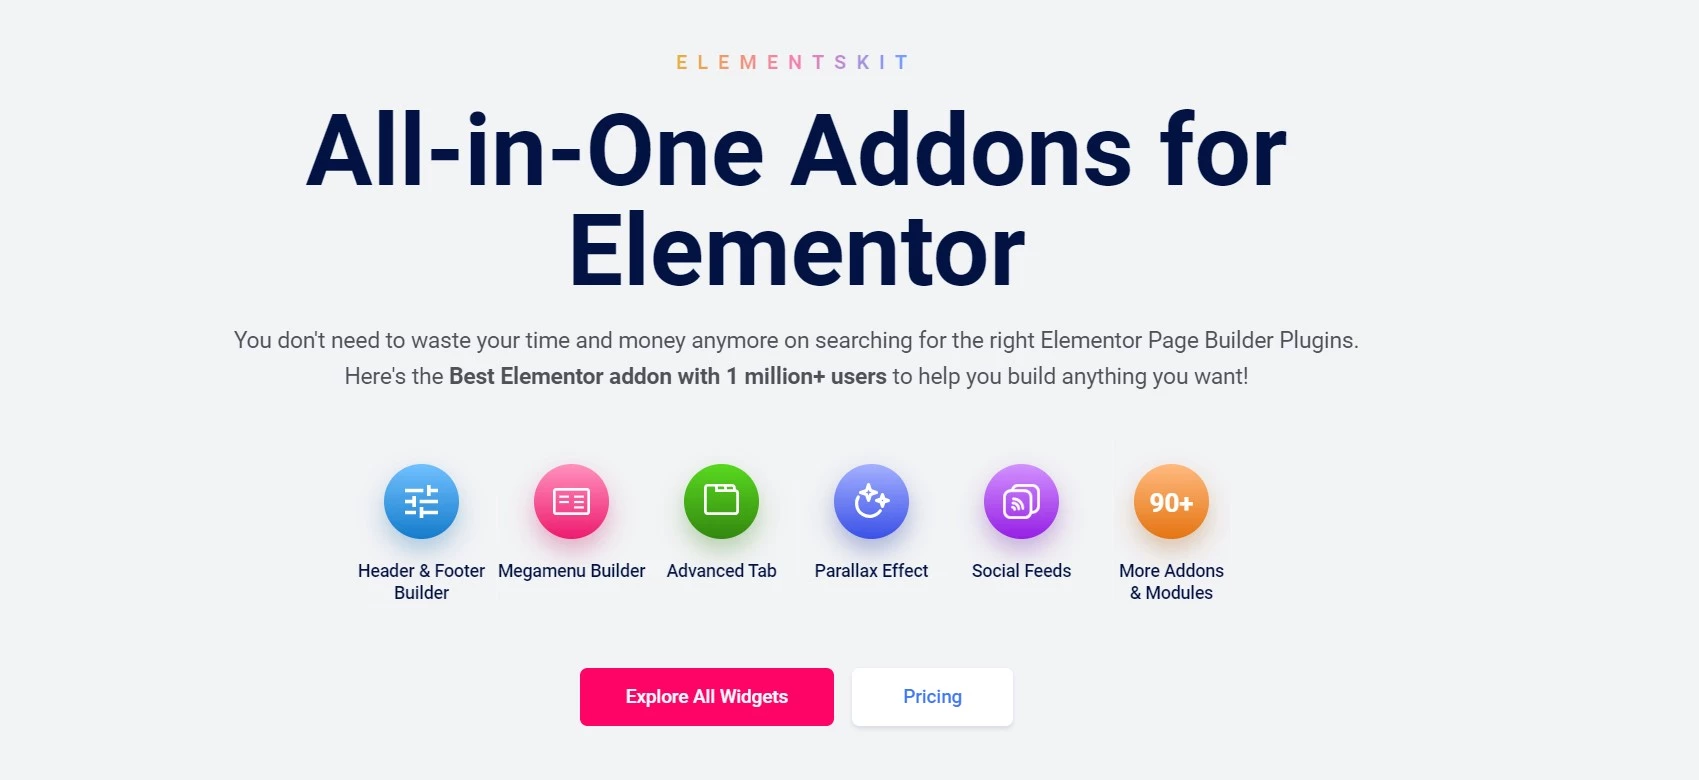 Elementskit All in One Addons For Elementor